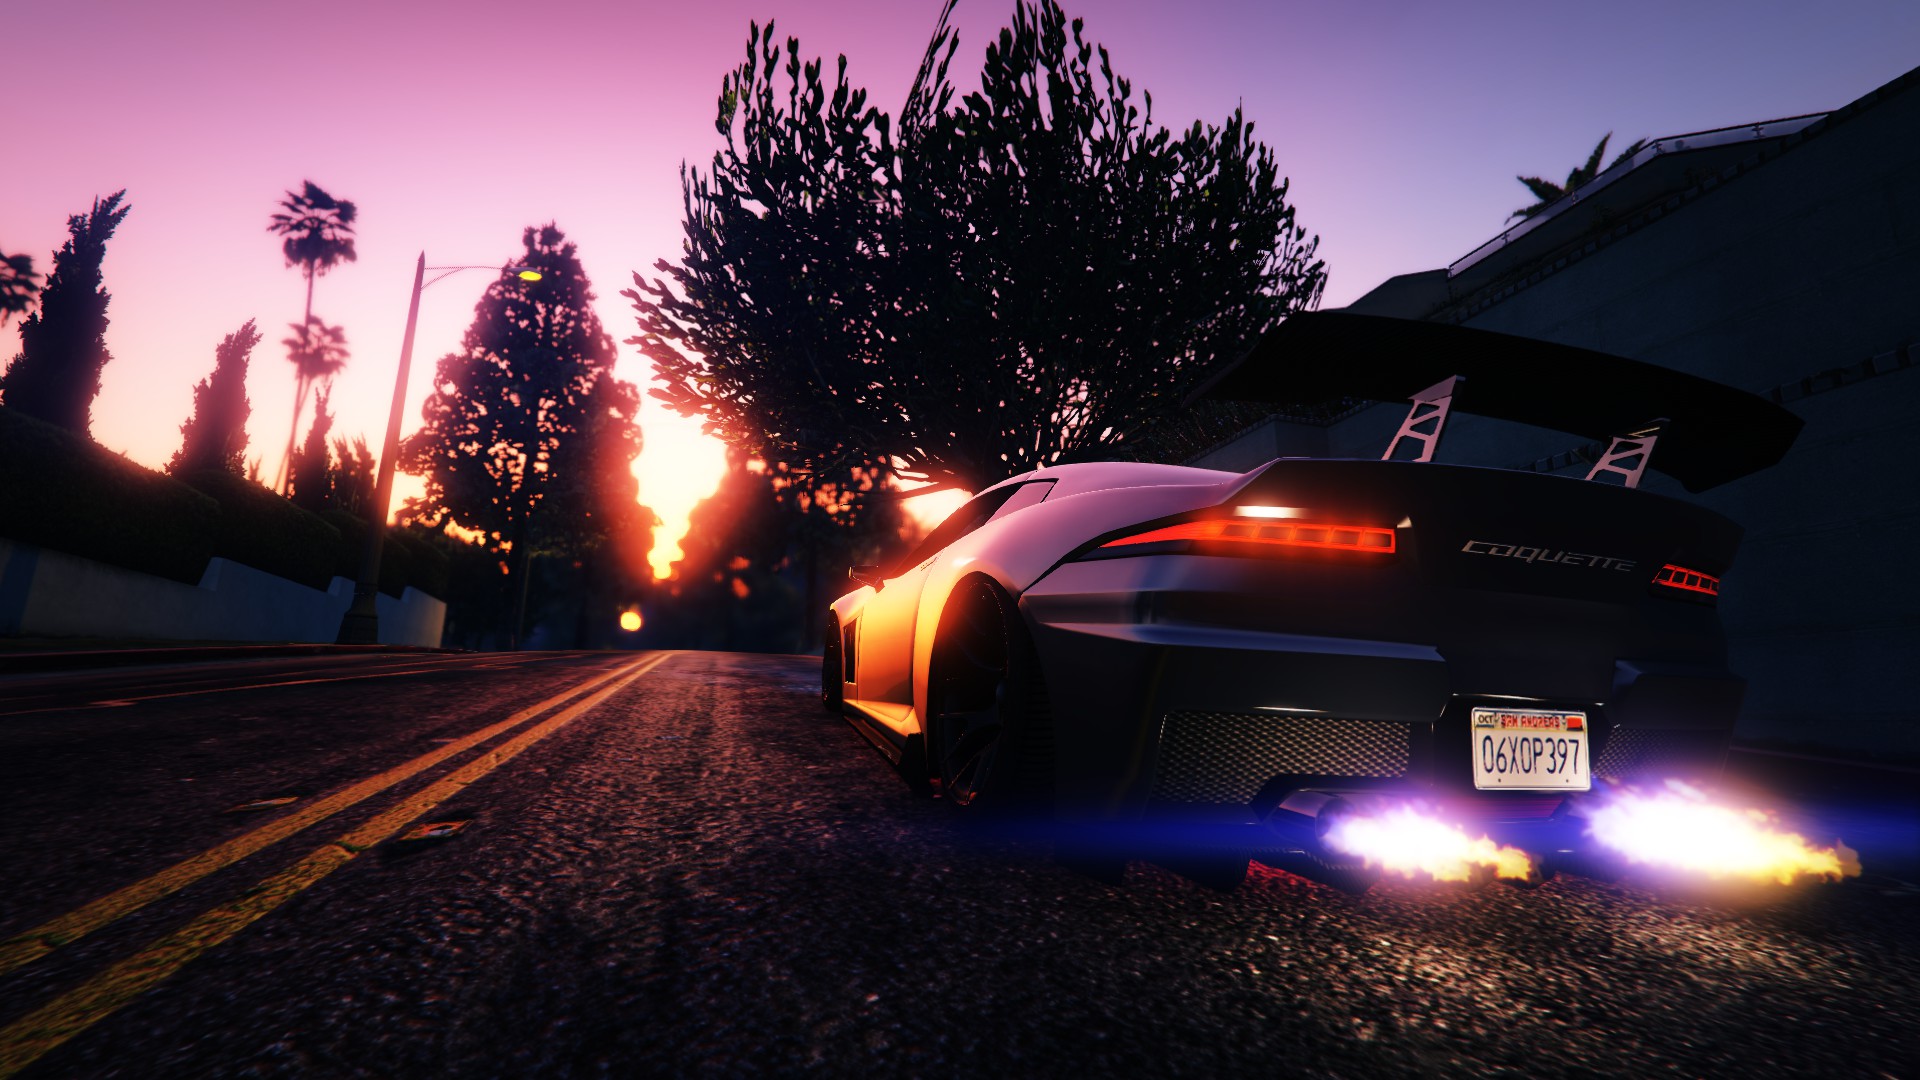 Grand Theft Auto V HD Wallpapers and Backgrounds. 